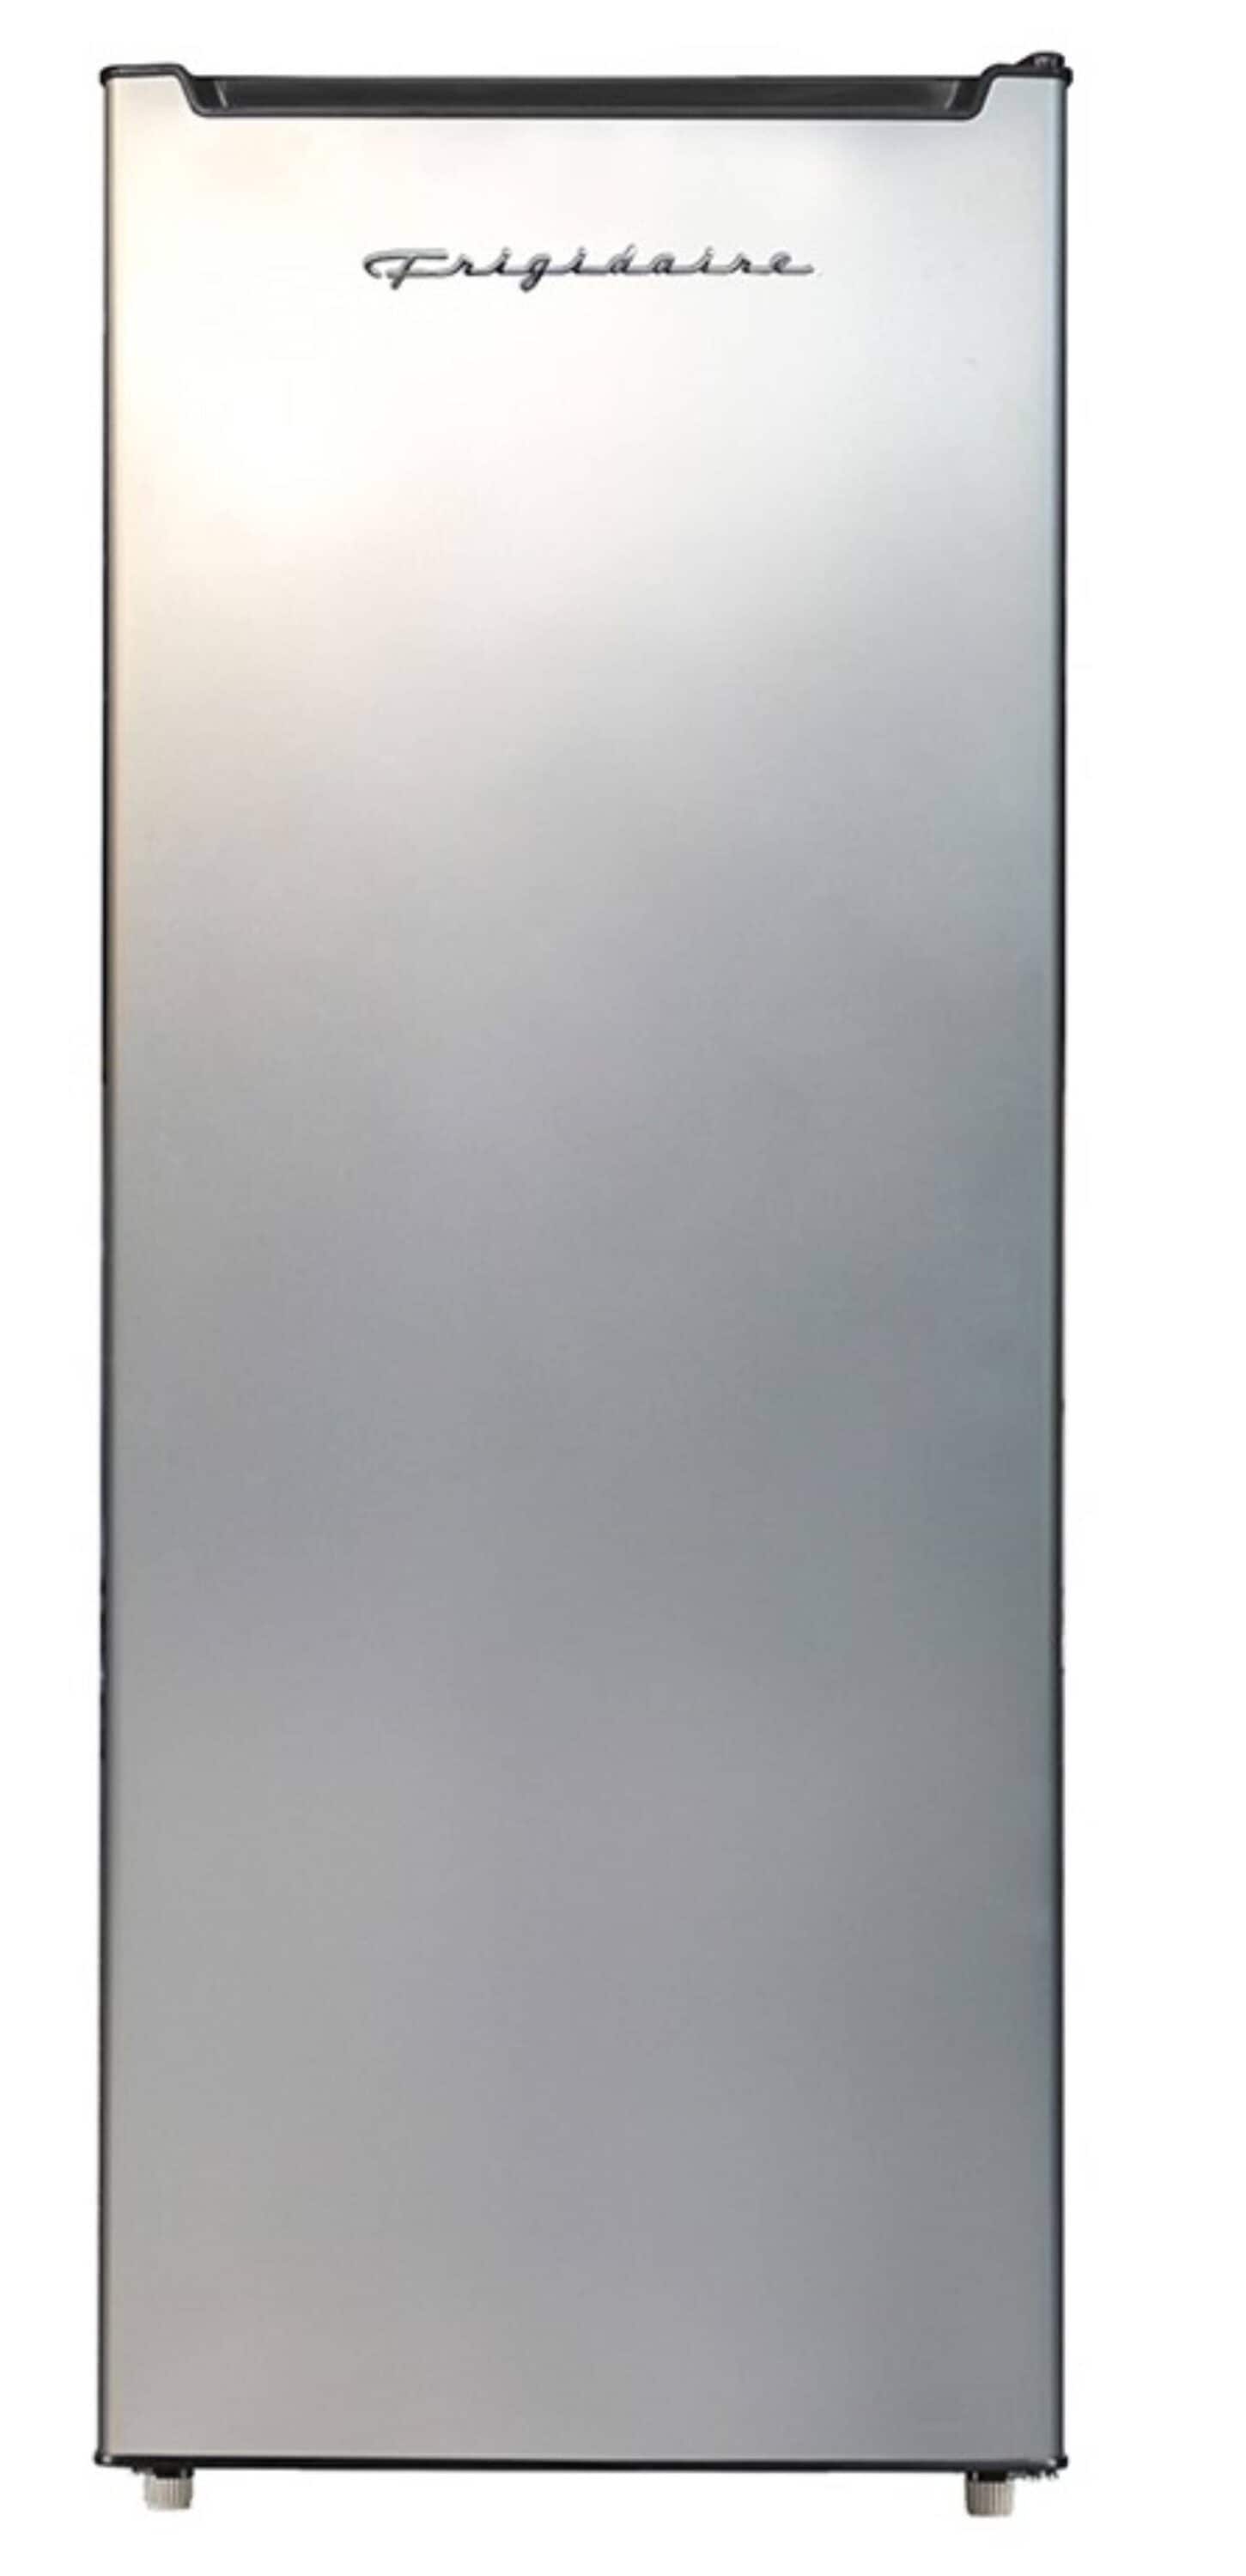 Frigidaire 6.5-cu ft Upright Freezer (Stainless Steel) in the Upright ...